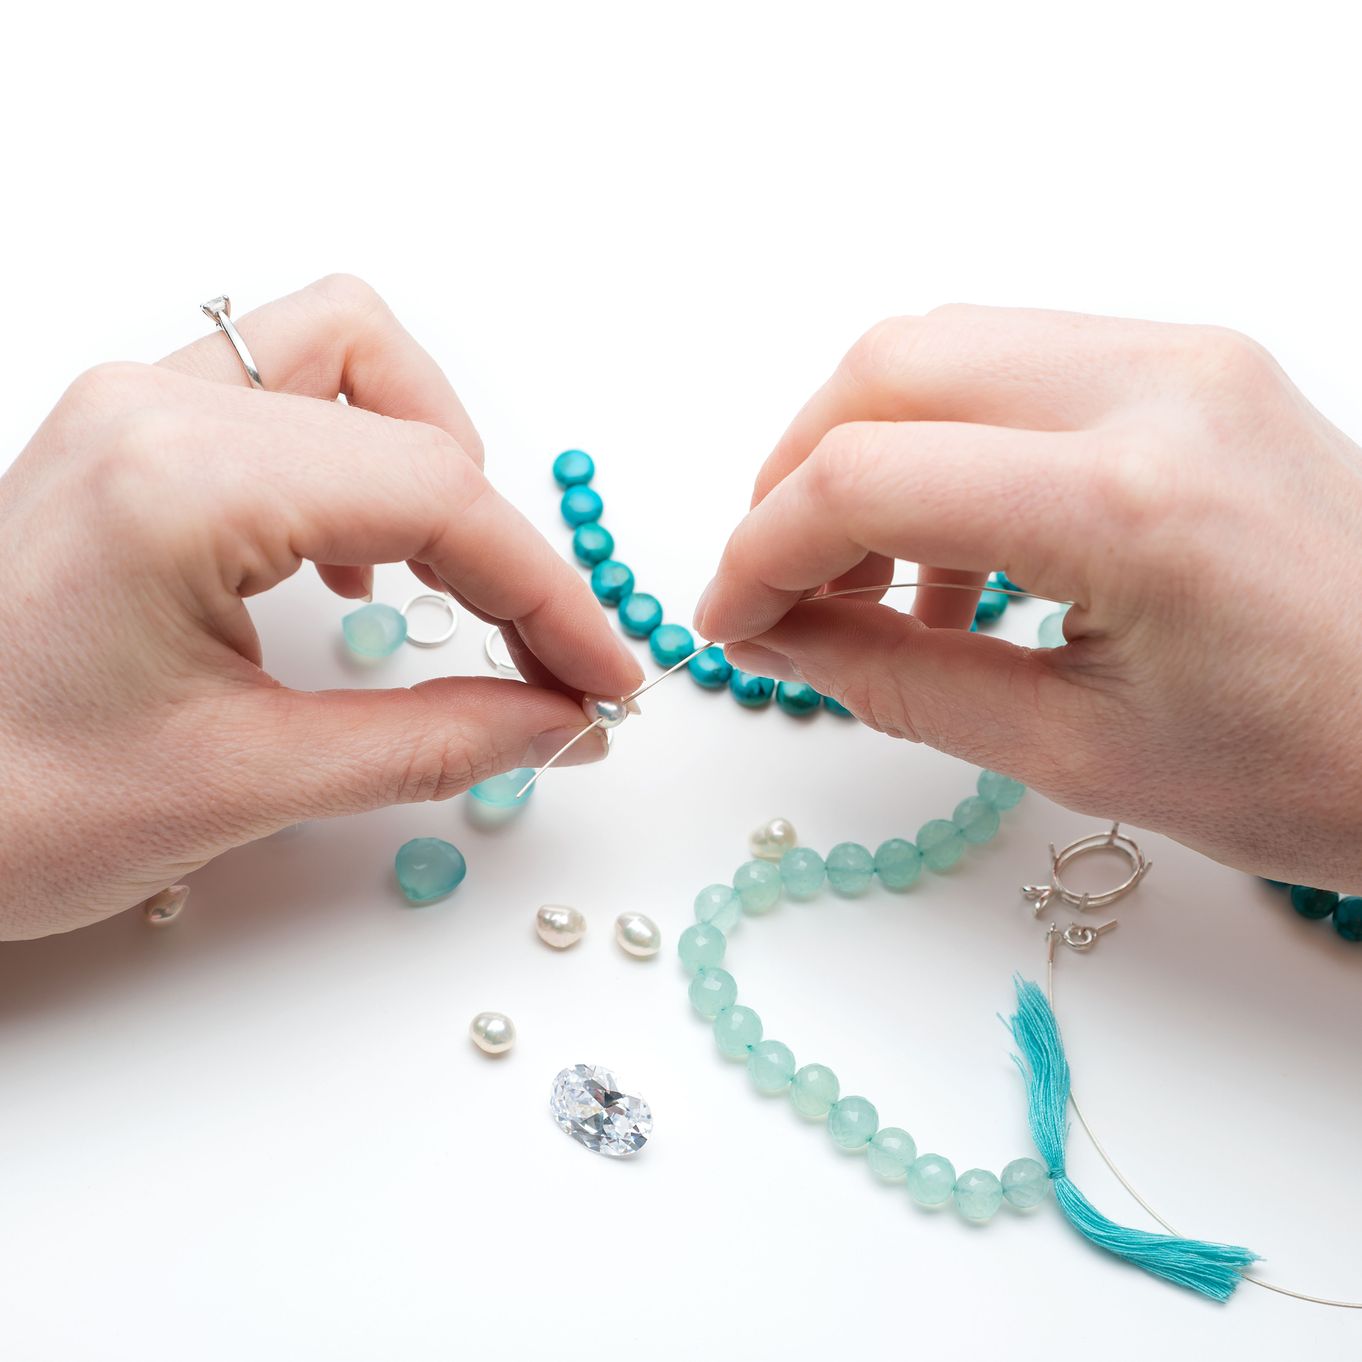 How To String Beads With Small Holes